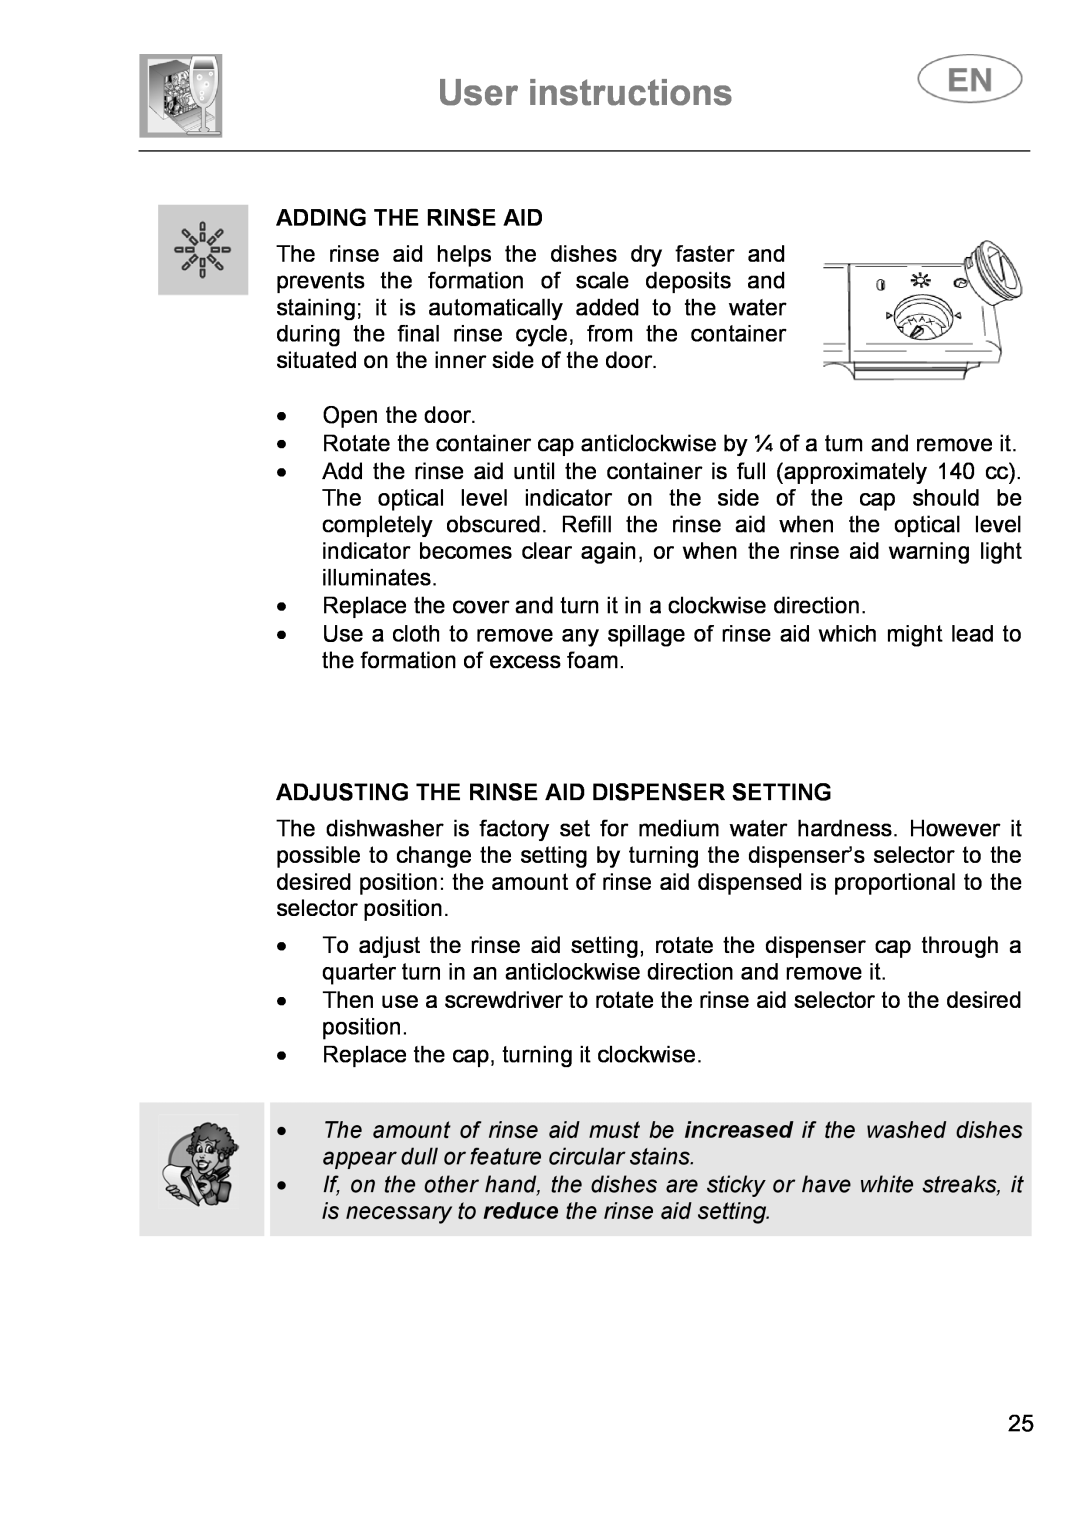 Smeg DI614H instruction manual User instructions, Adding The Rinse Aid, Adjusting The Rinse Aid Dispenser Setting 